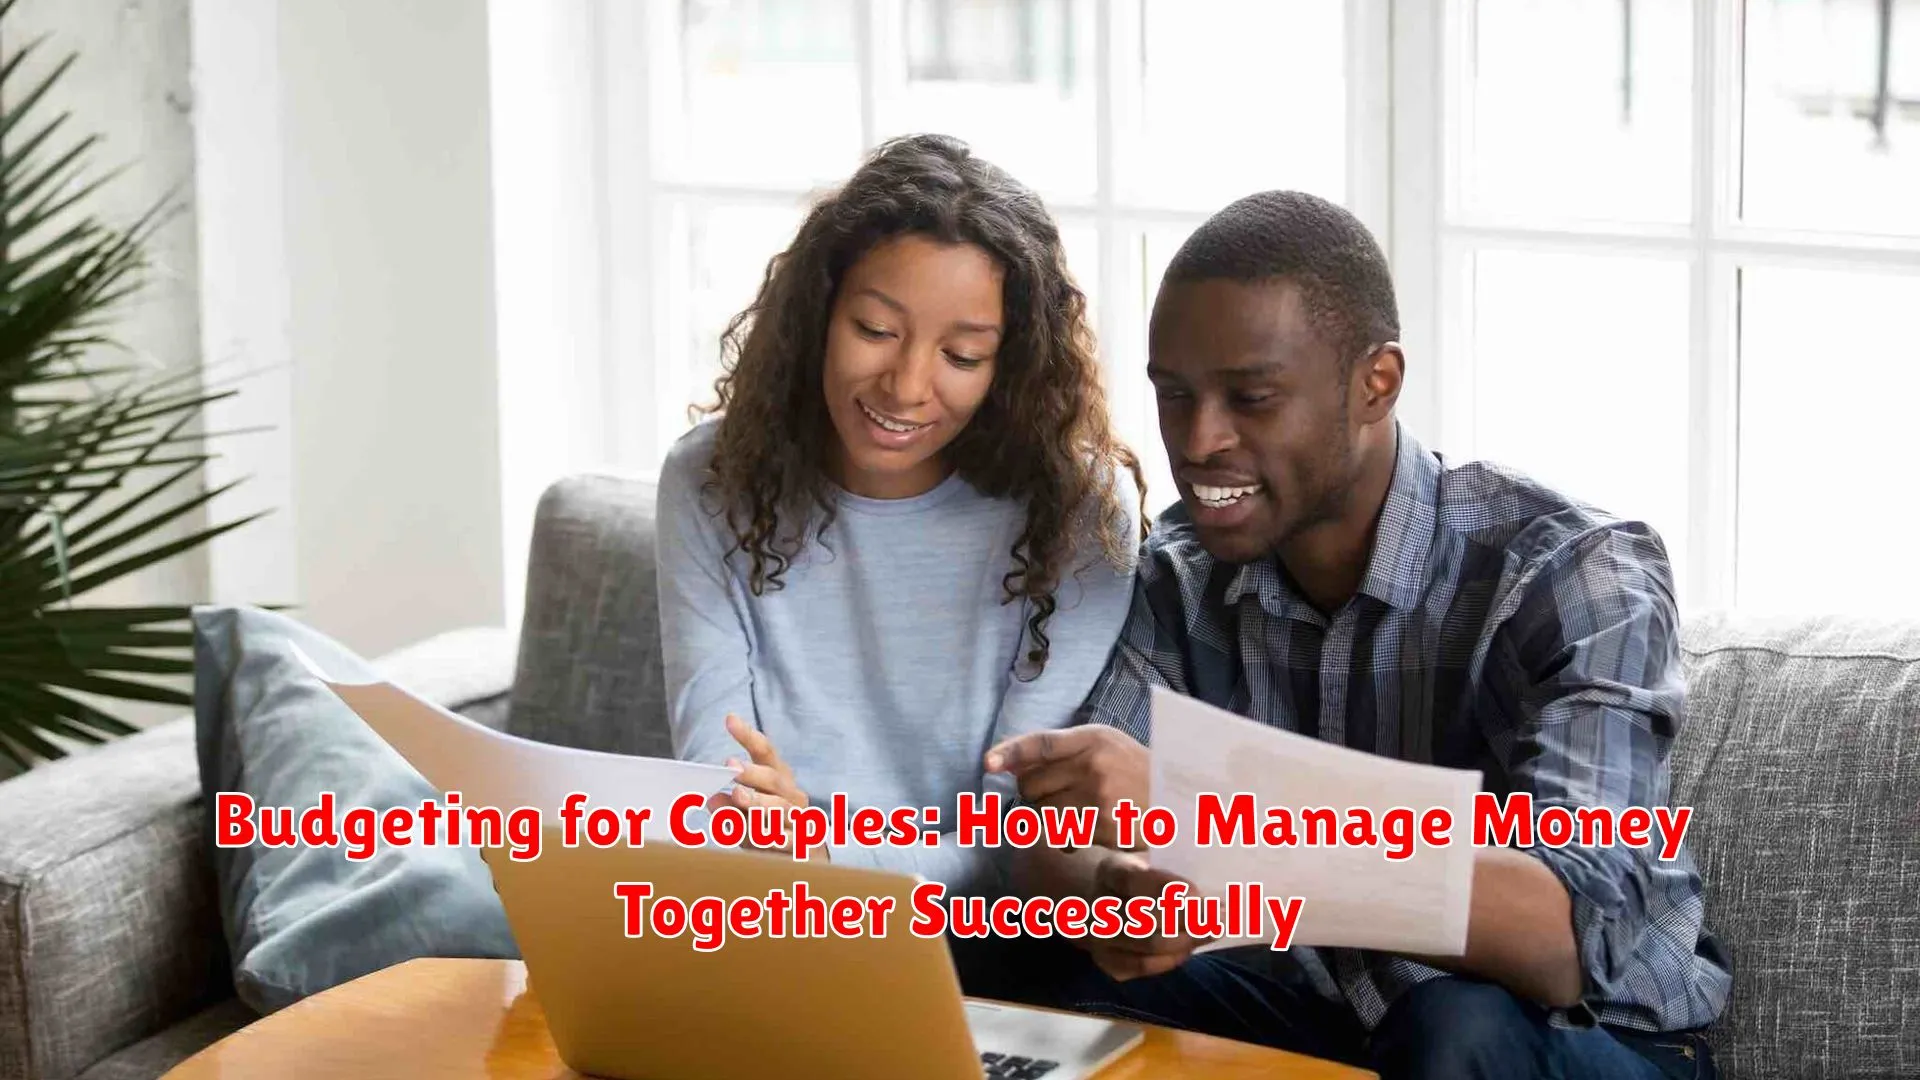 Budgeting for Couples: How to Manage Money Together Successfully